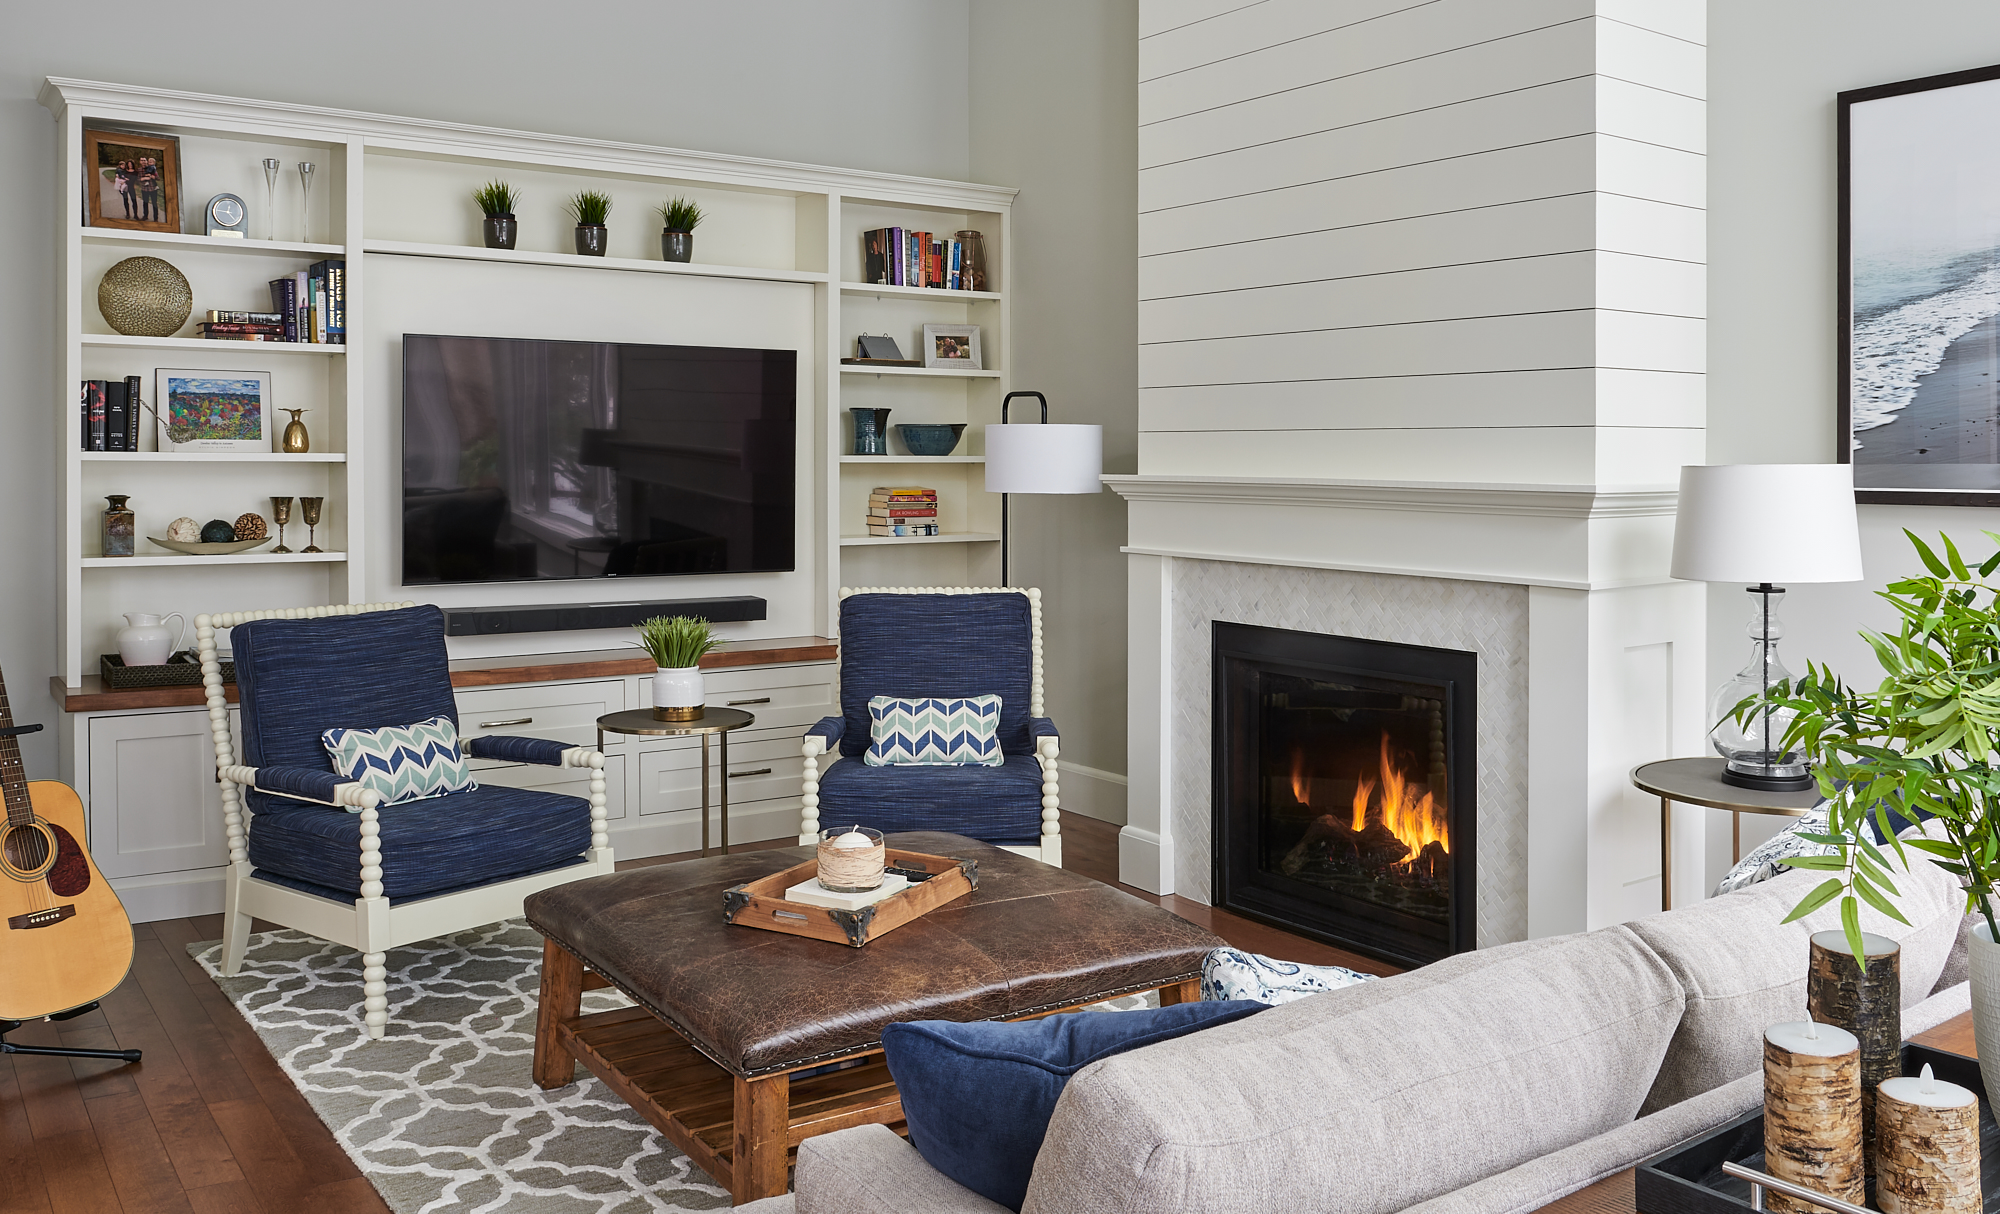 The BIG reveal for this Coastal Living Room